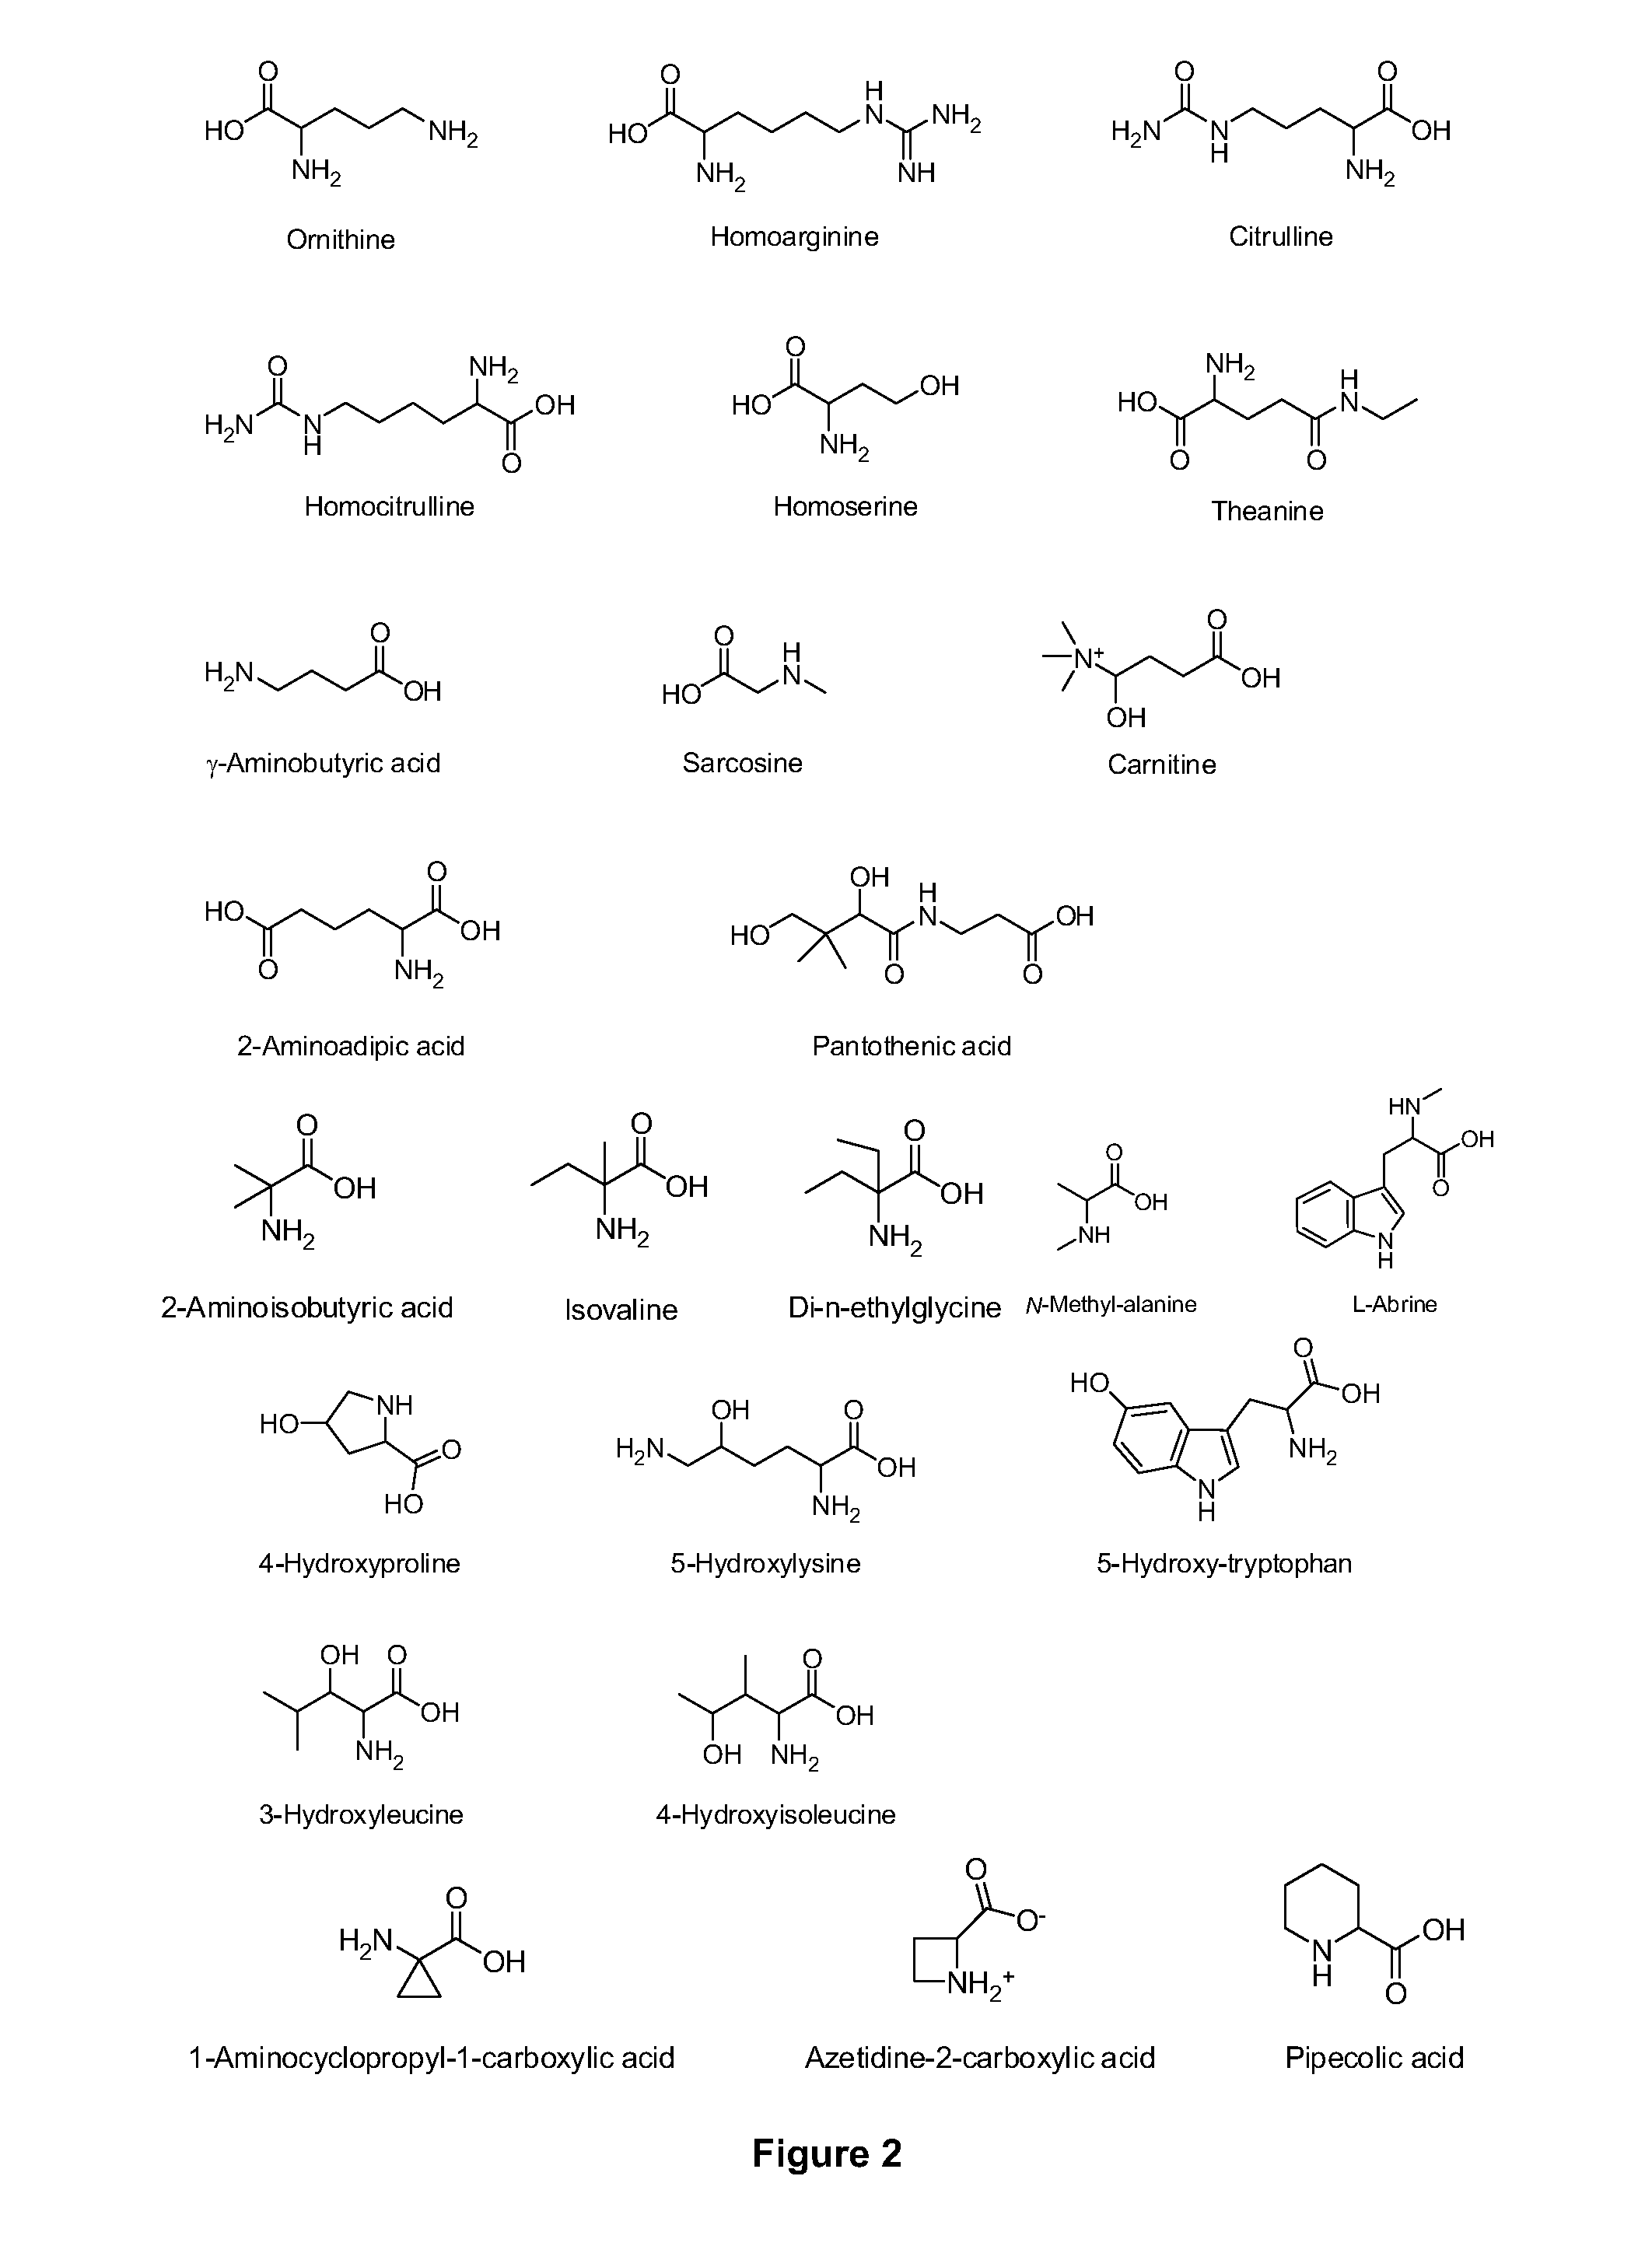 Amino acid conjugates of quetiapine, process for making and using the same